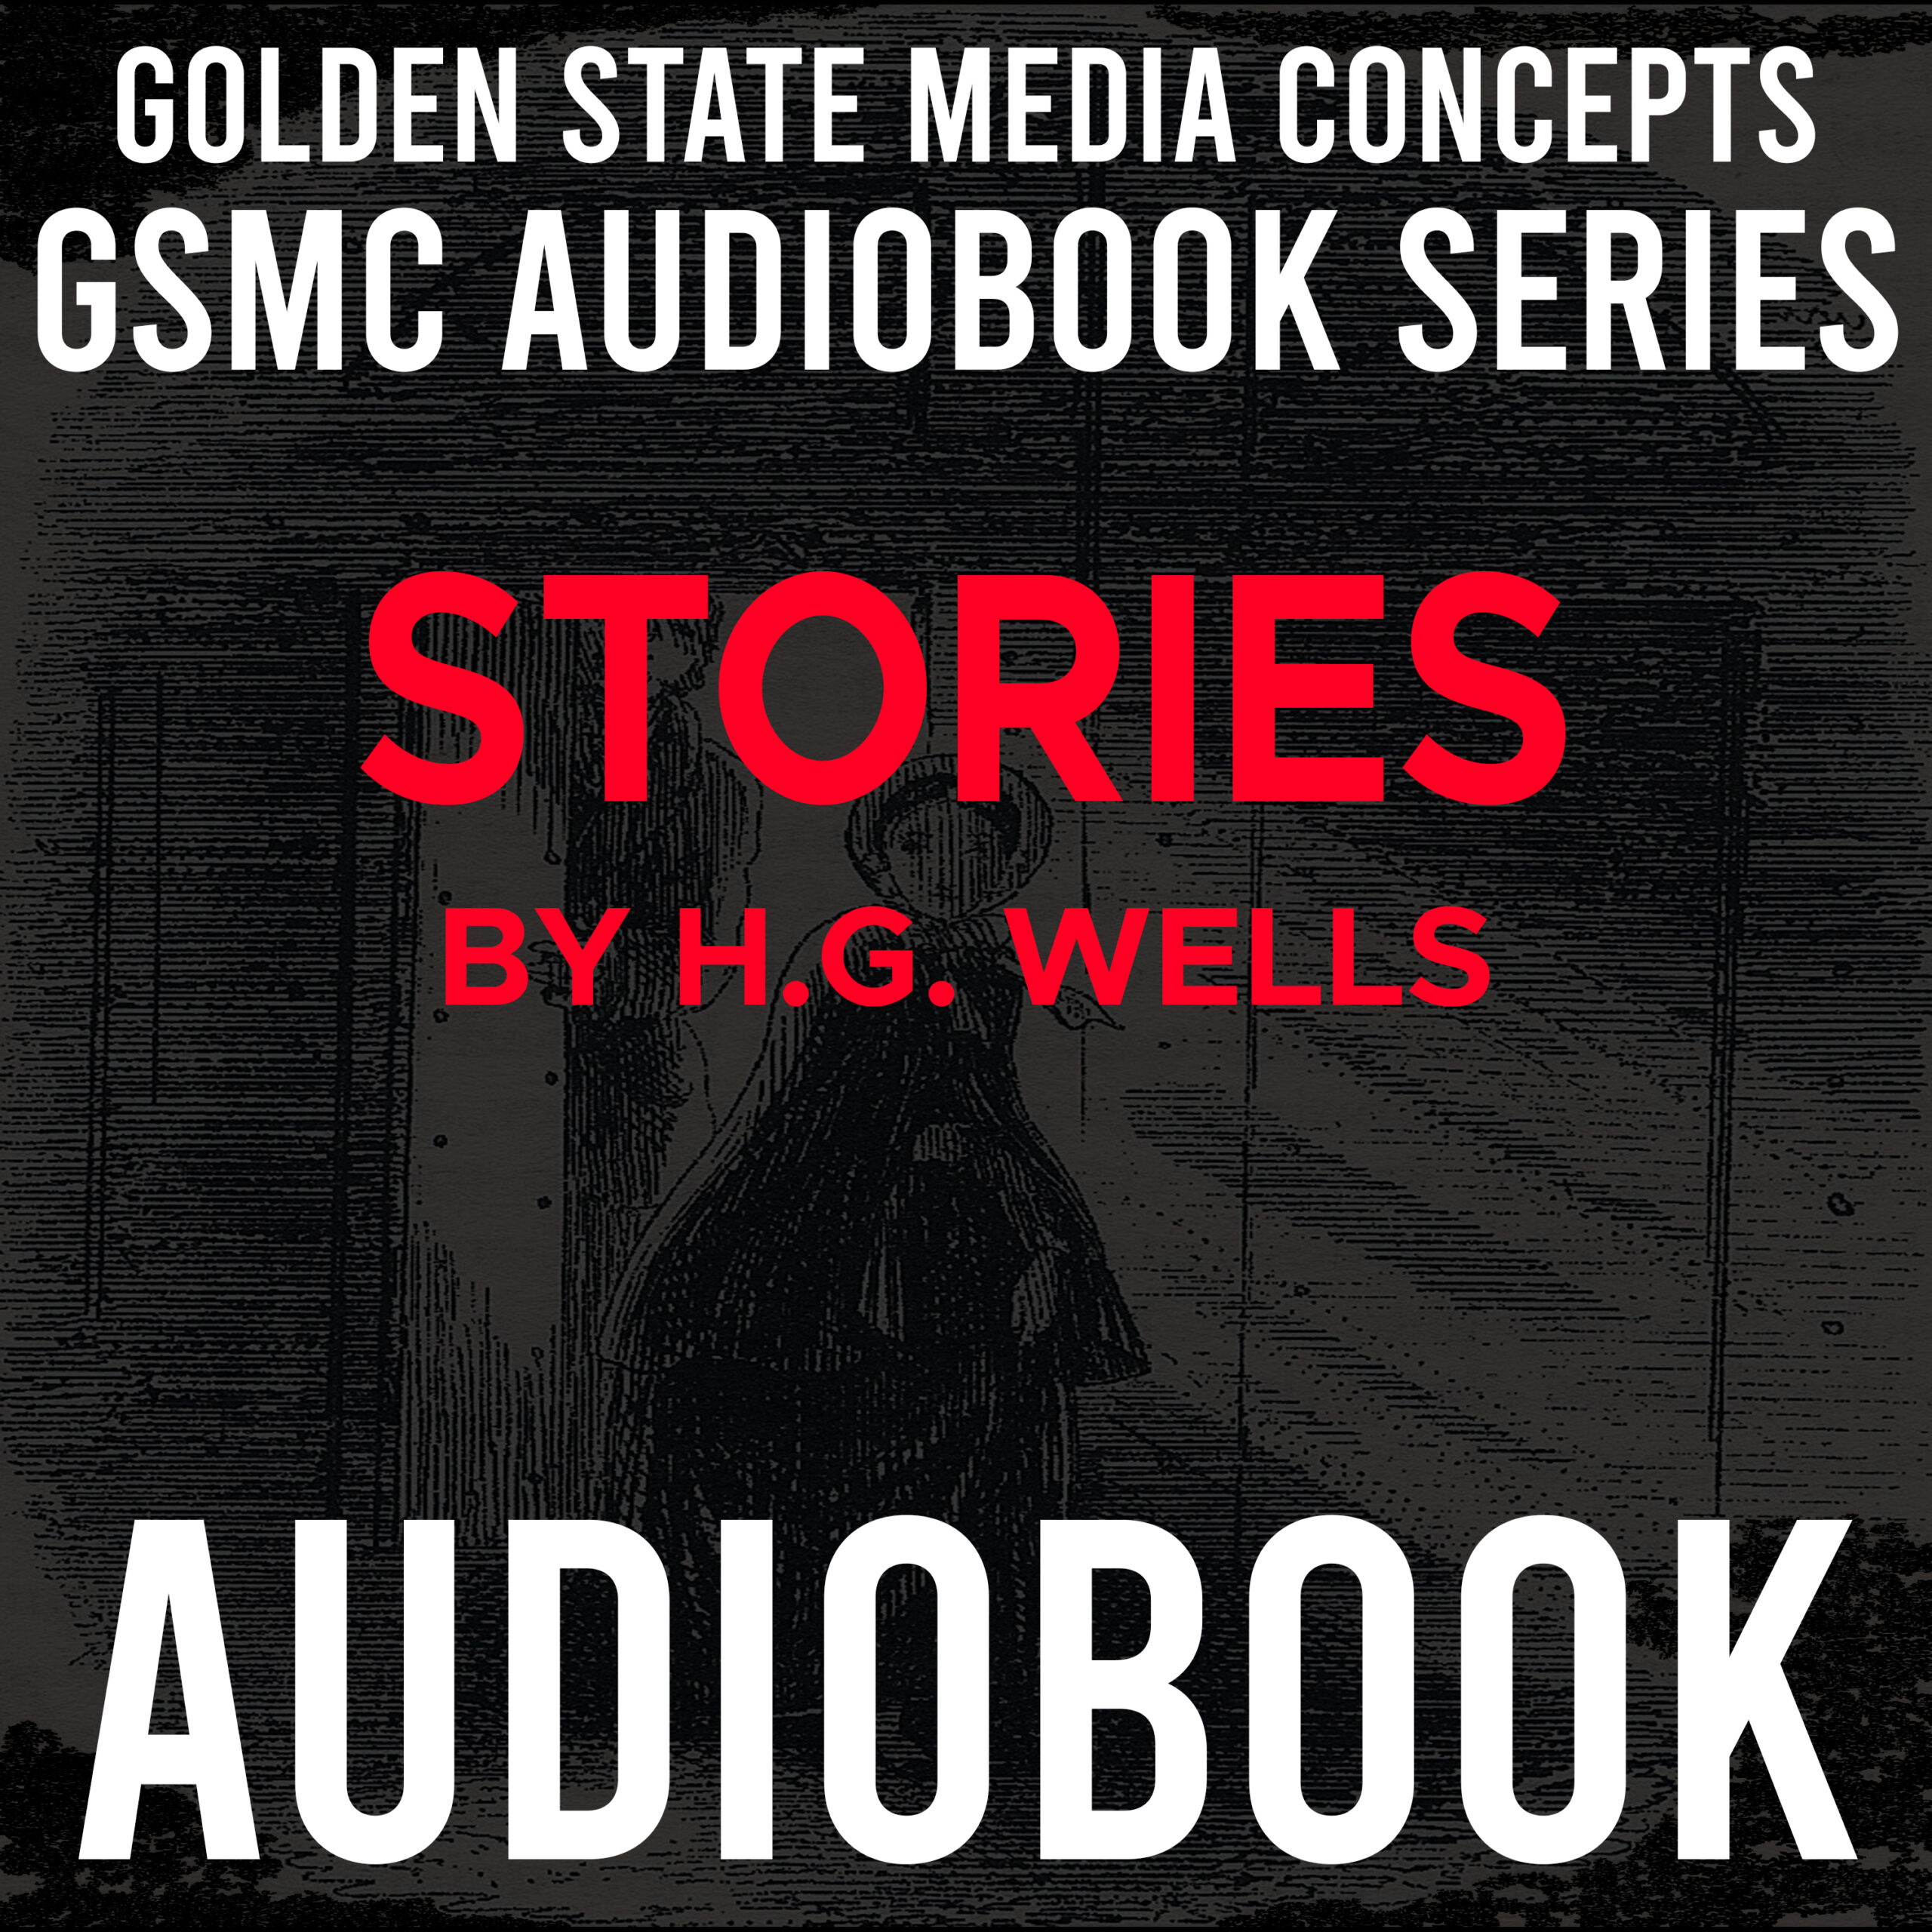 GSMC Audiobook Series: Stories by H.G. Wells